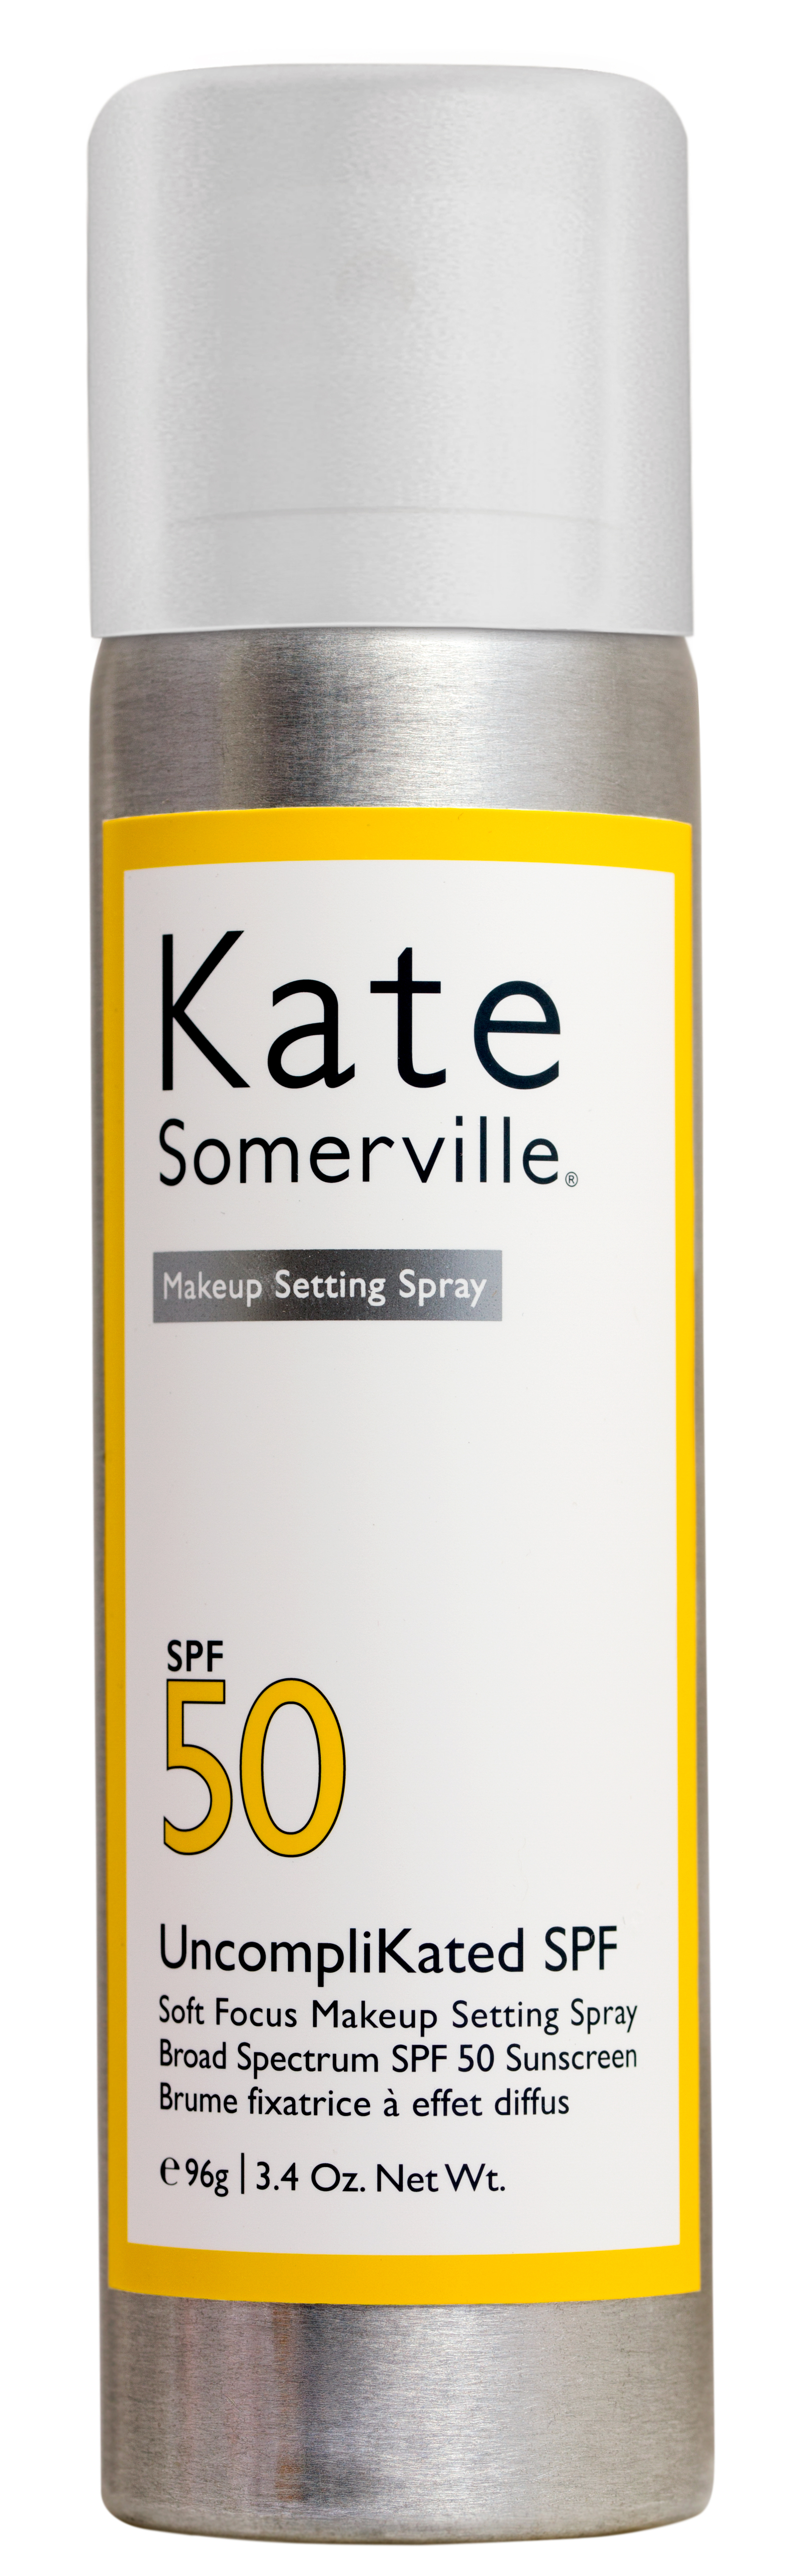 Kate Somerville, one of the best multitasking beauty products